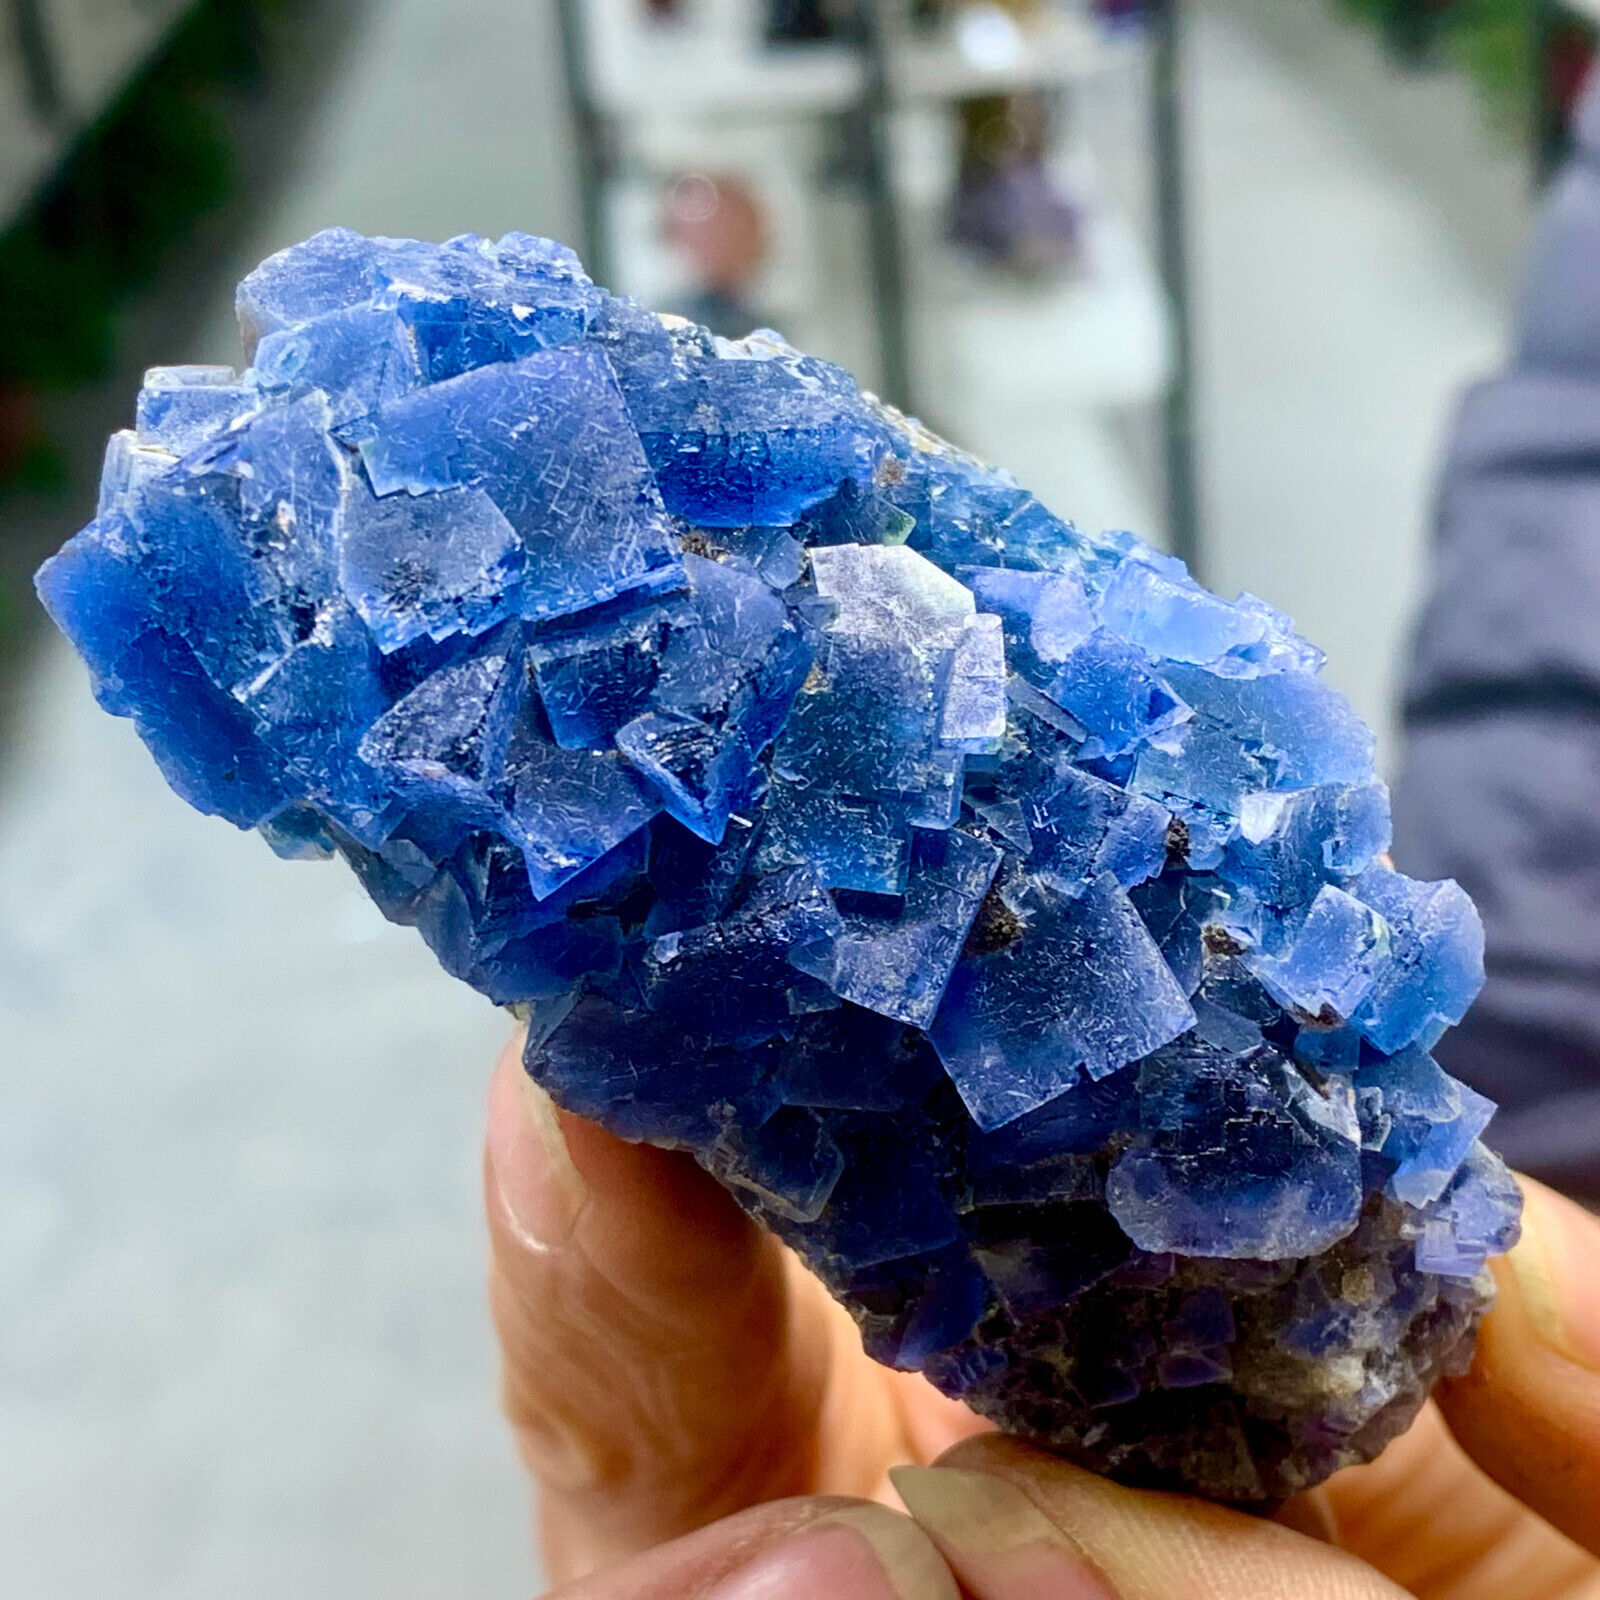 119G Rare transparent blue cubic fluorite mineral crystal samples/China